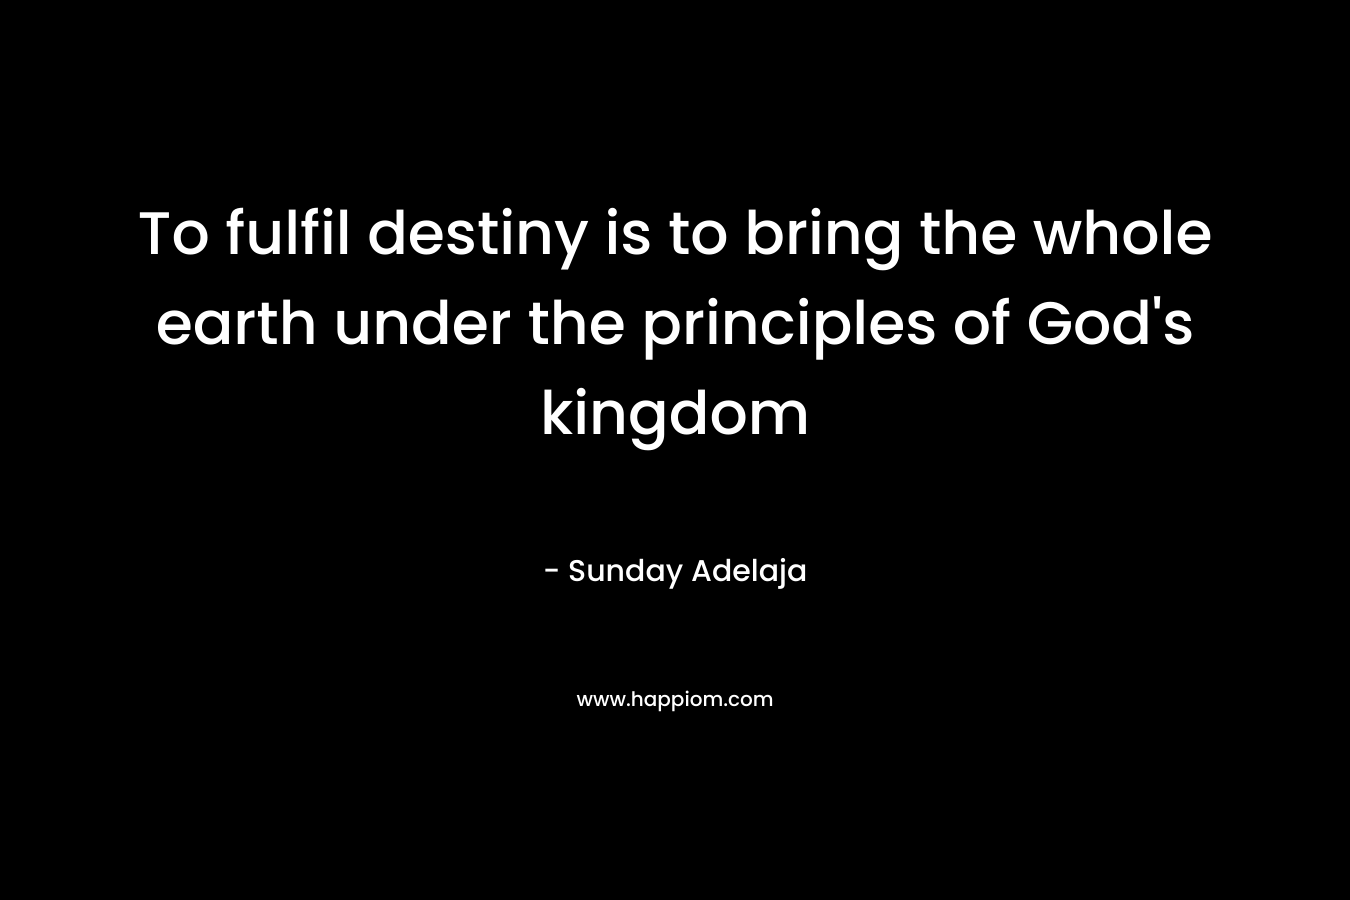 To fulfil destiny is to bring the whole earth under the principles of God's kingdom